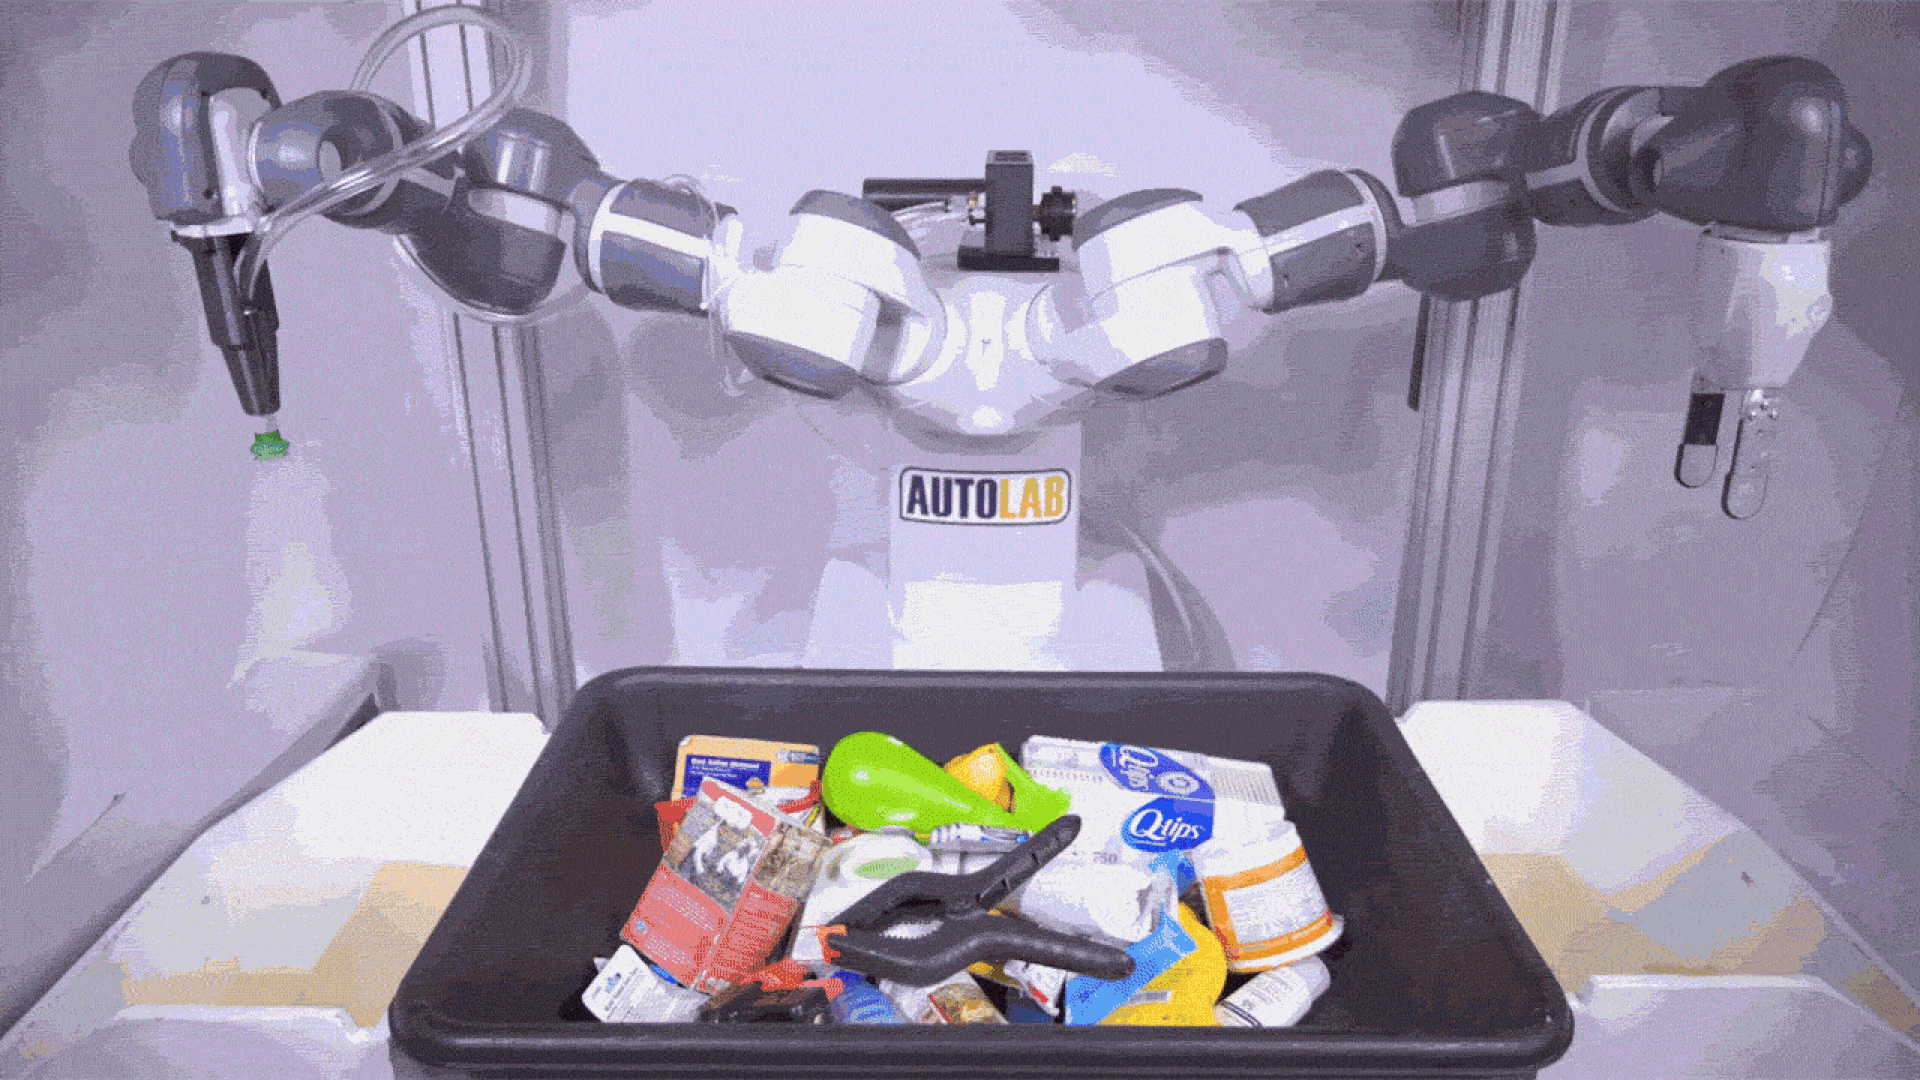 A video of a two-armed robot alternately picking up items from one bin and dropping them in another.